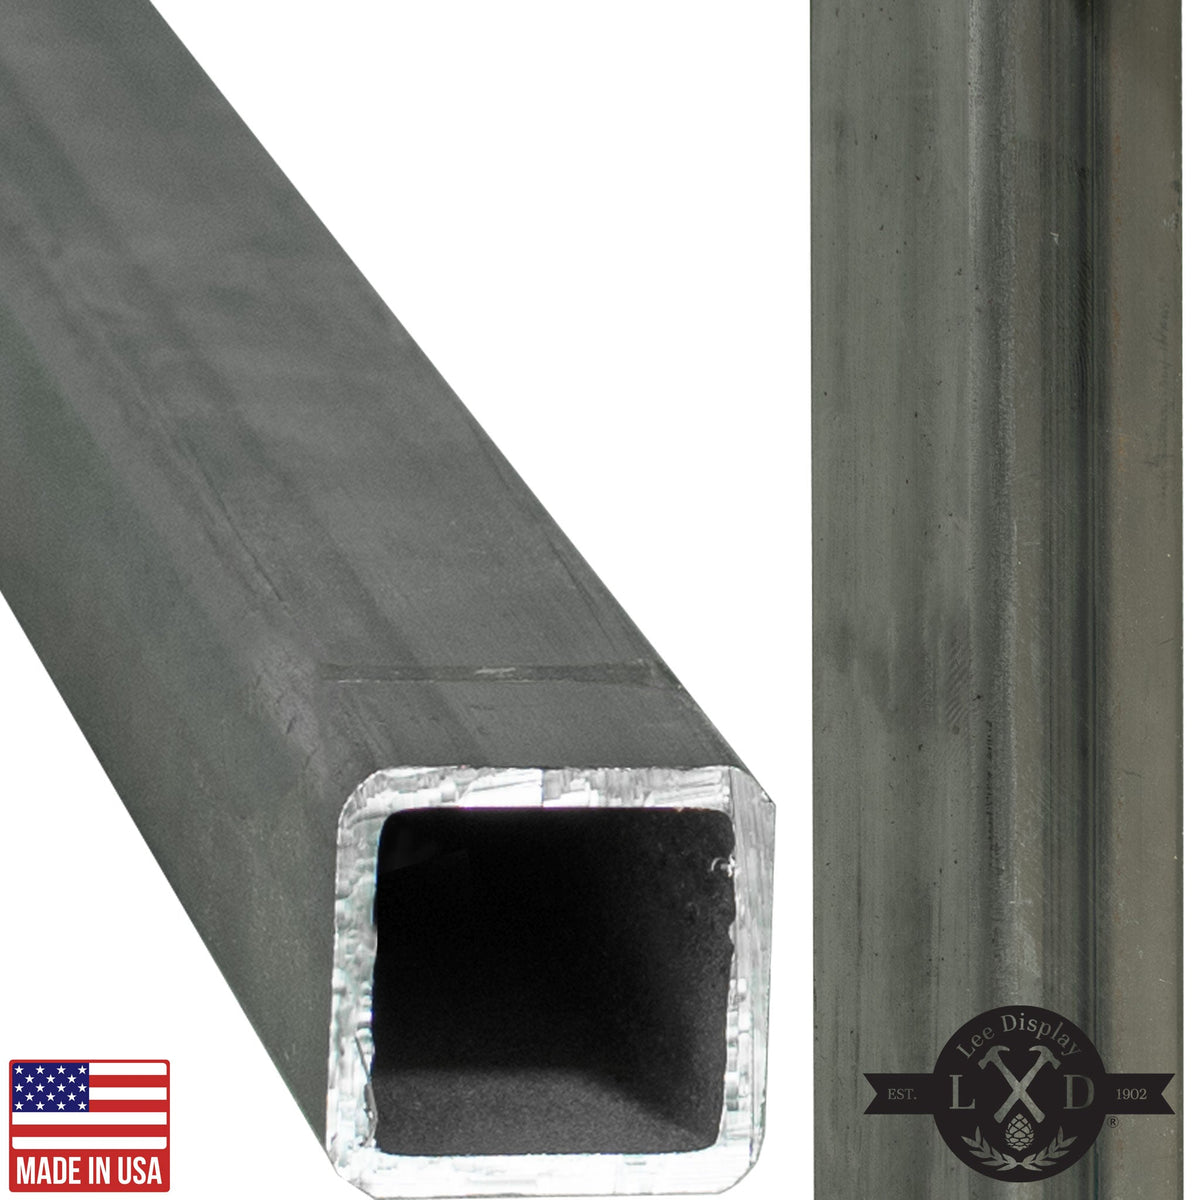 Square Tube American Steel sold by the foot from Lee Display